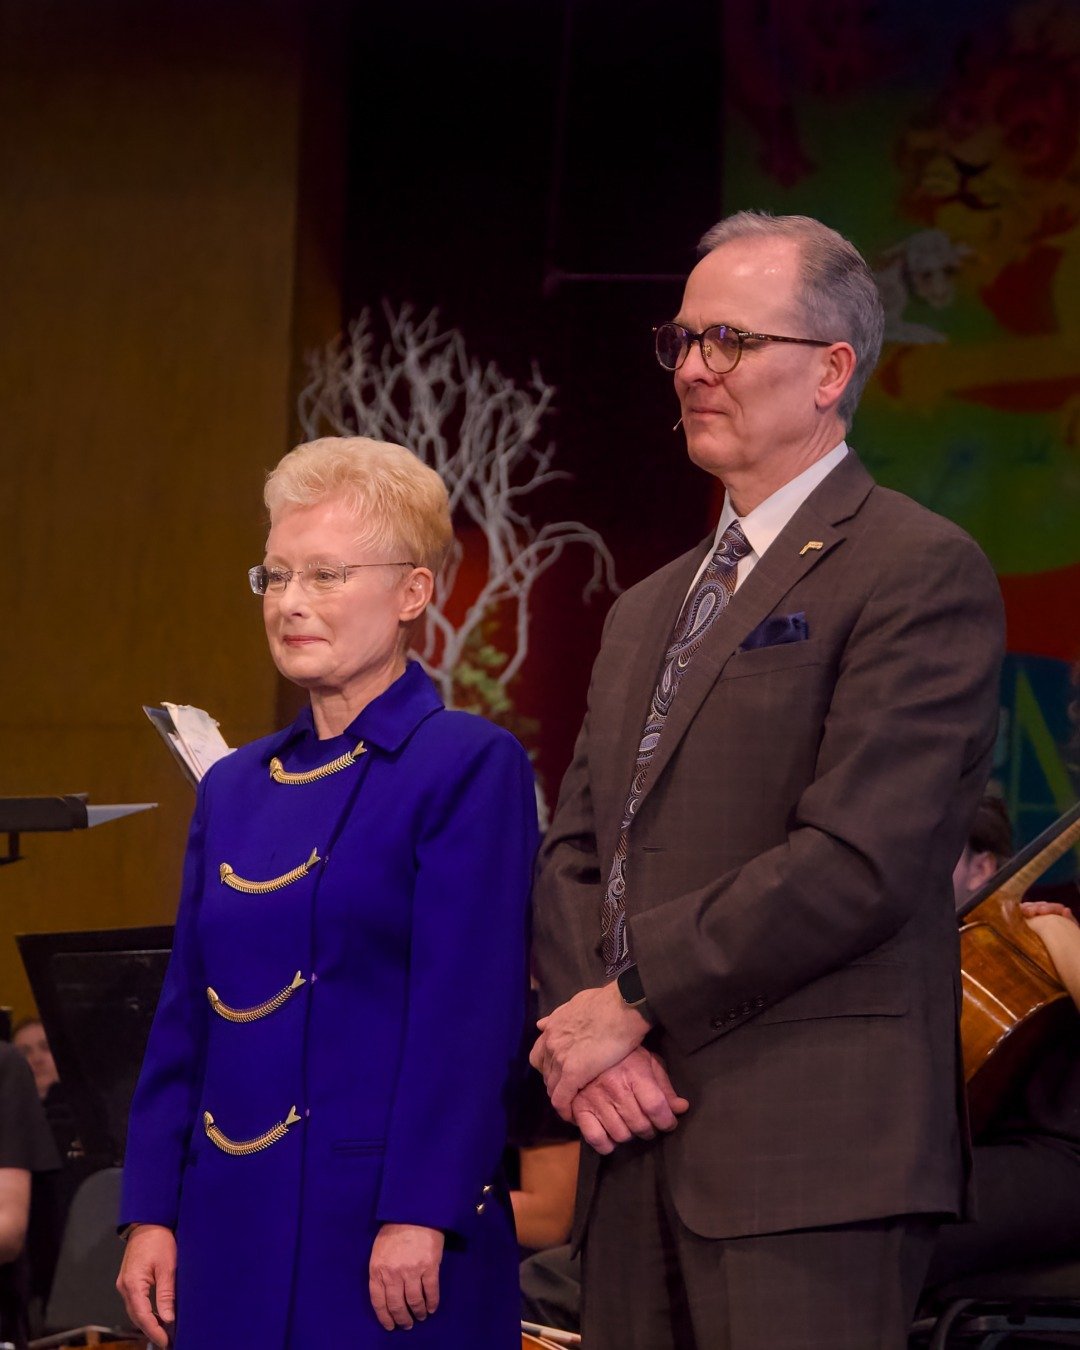 Last week was WWU Homecoming Sabbath. John and Pam McVay were recognized for their 18 years of service at WWU.